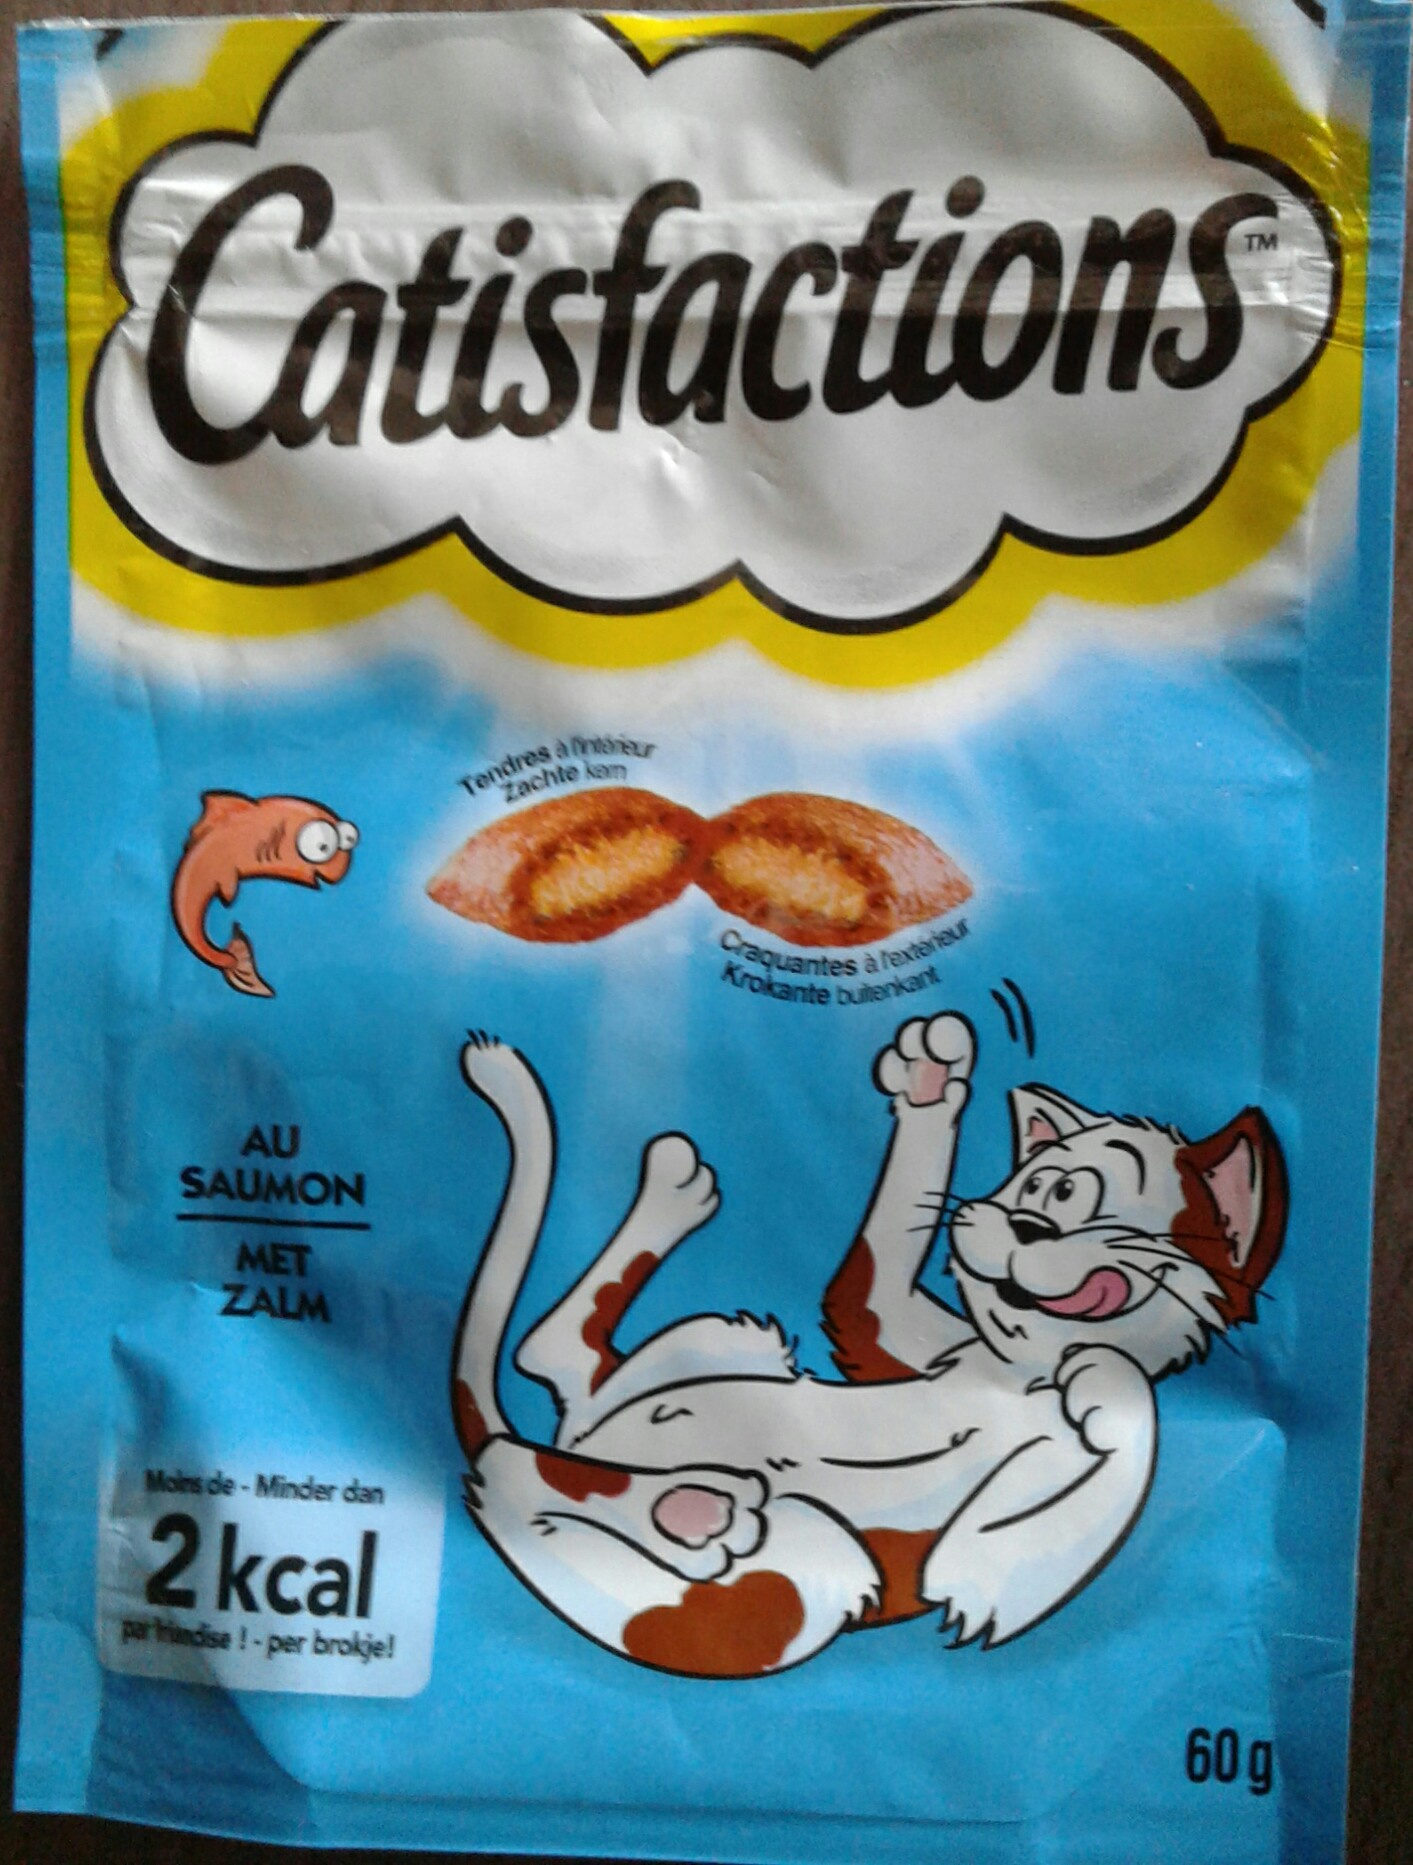 catisfactions - Product - fr